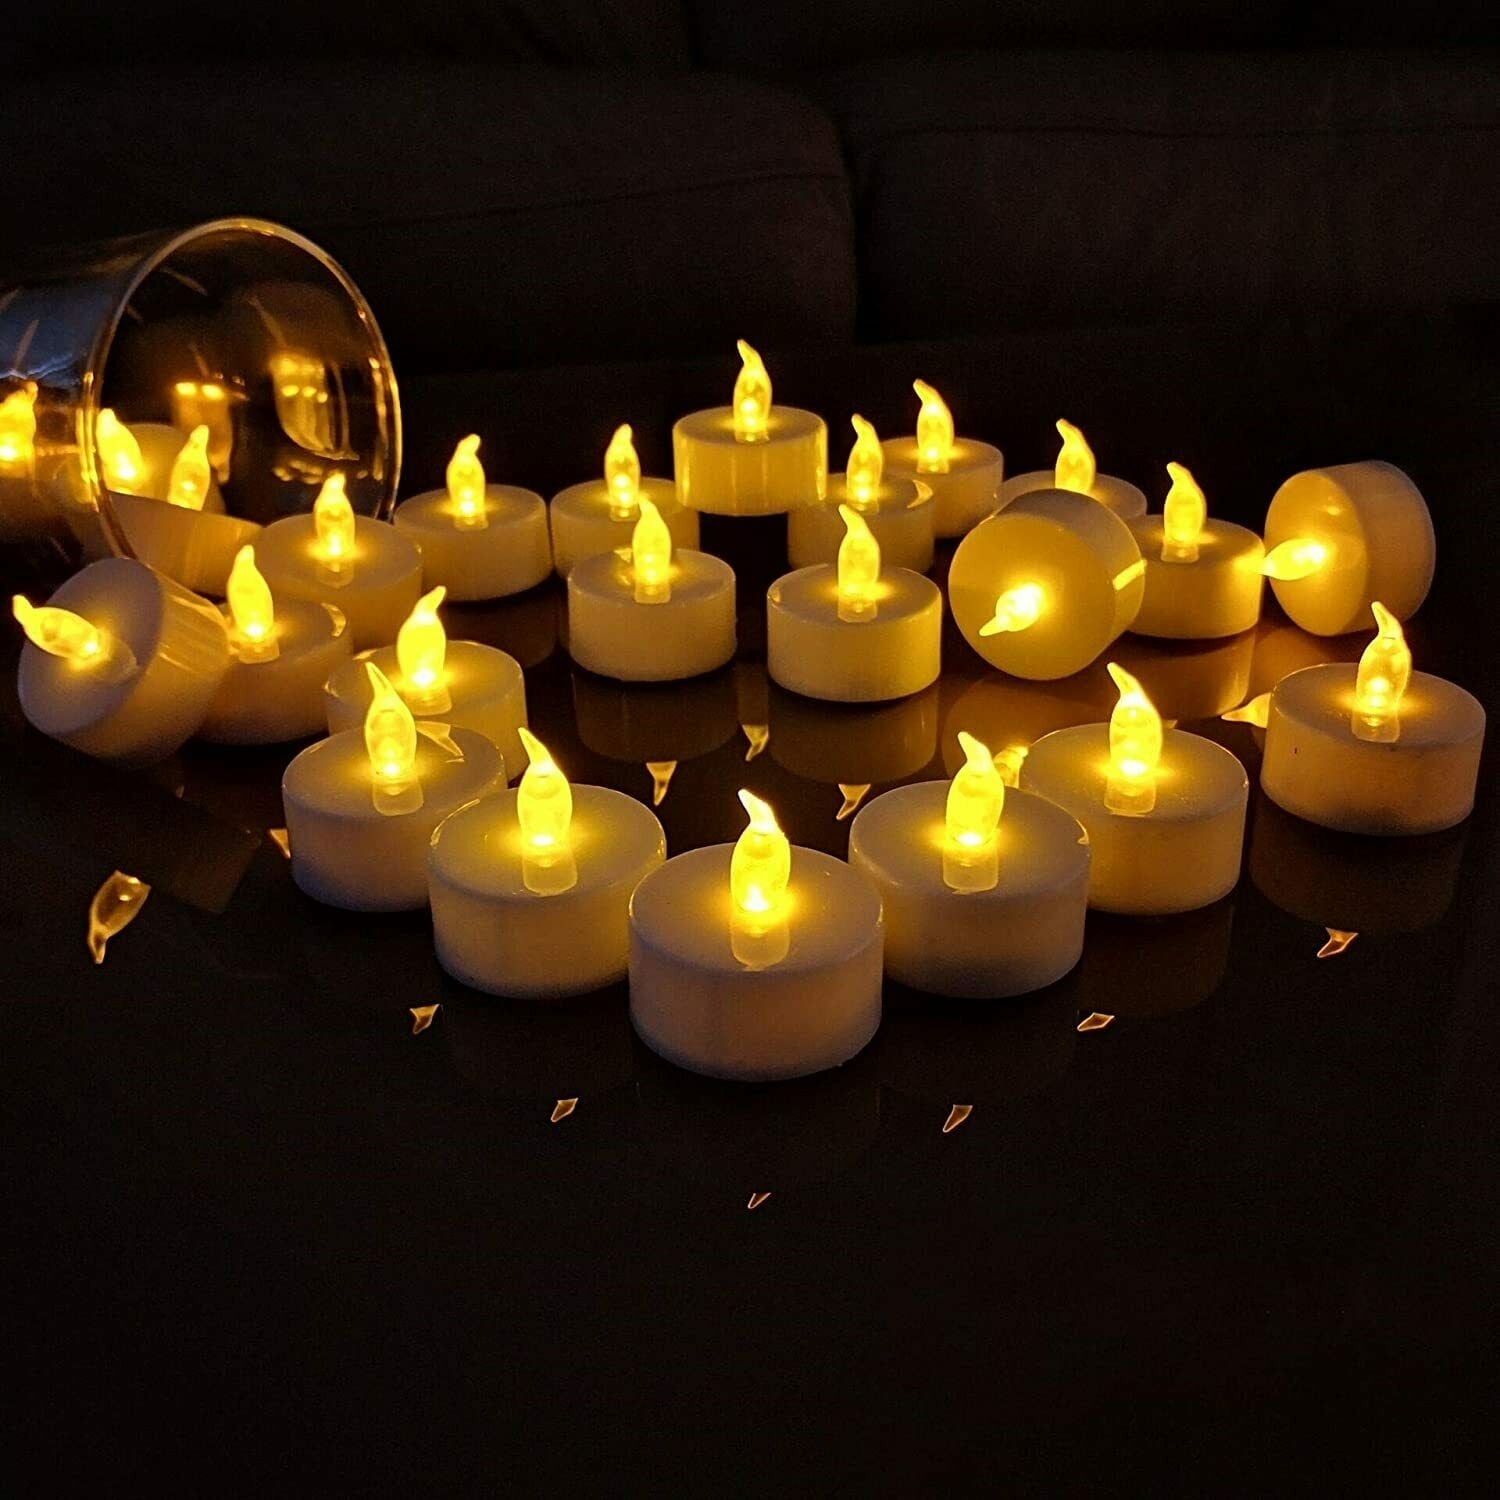 10x New LED Tea Light Wedding Party Flameless Candle AMBER YELLOW 